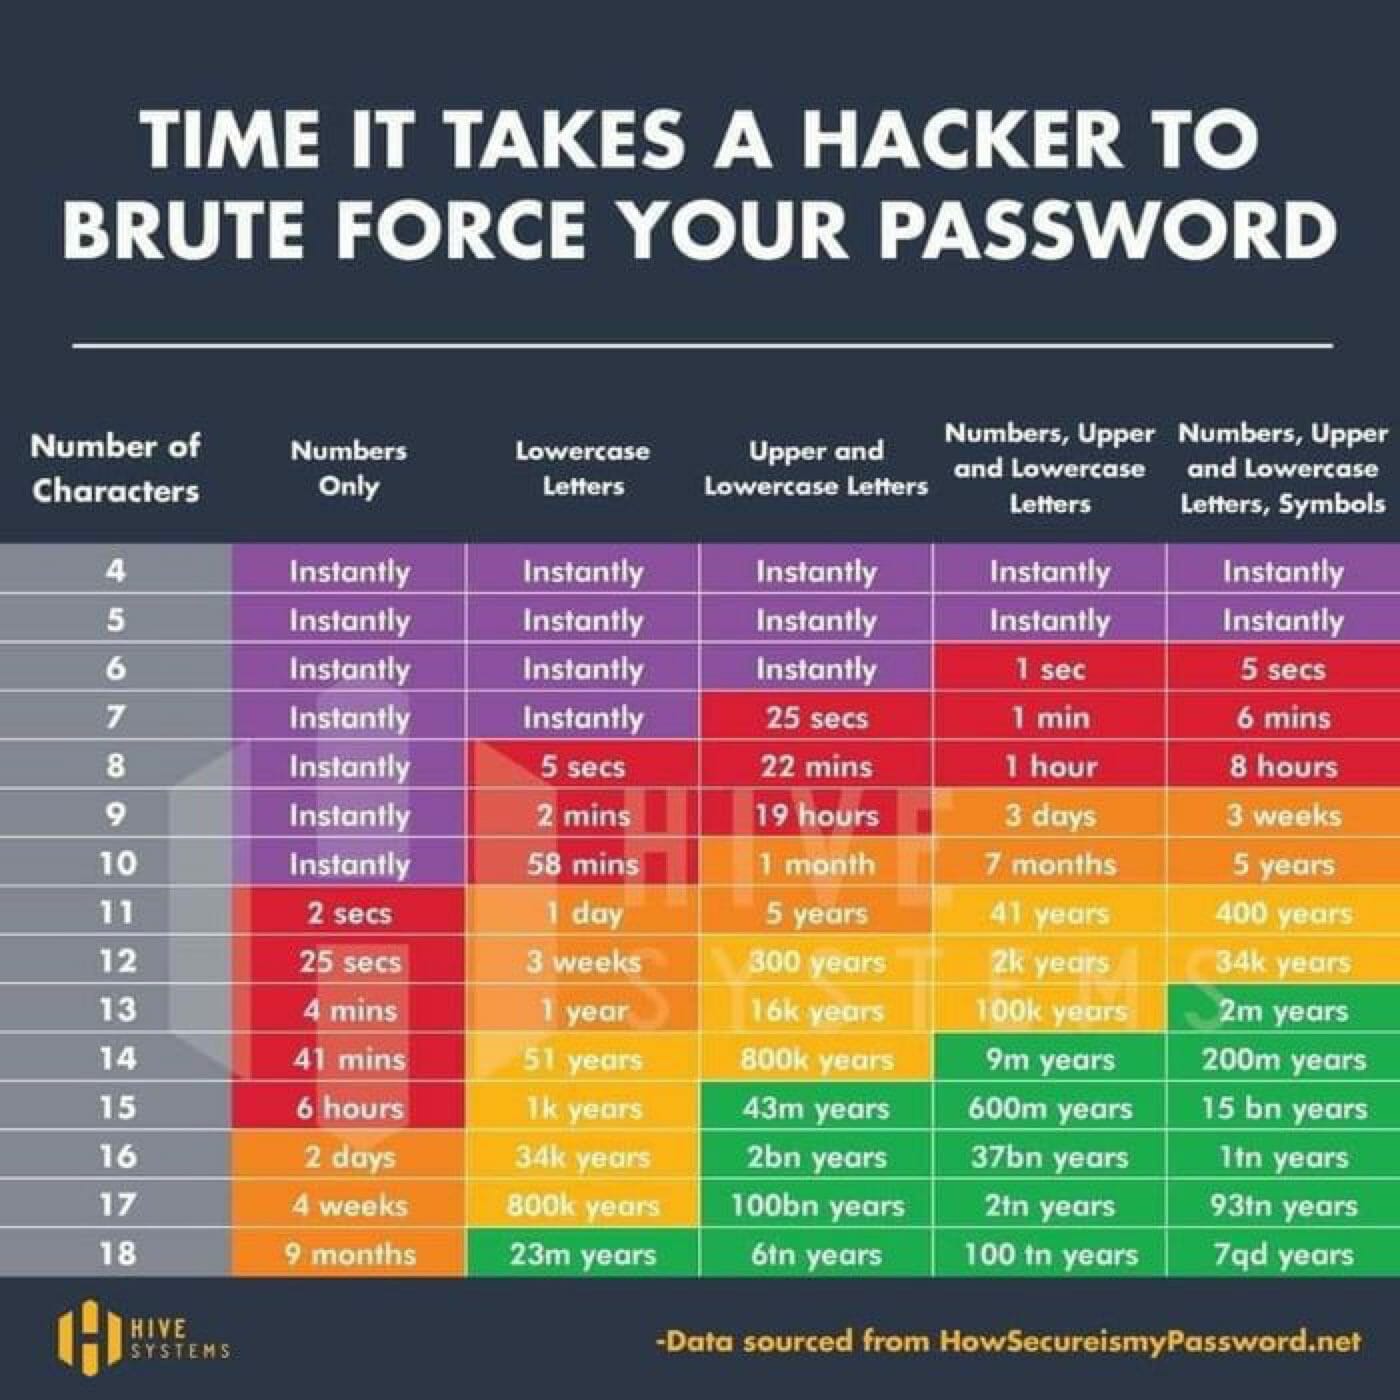 Table showing times to hack a password